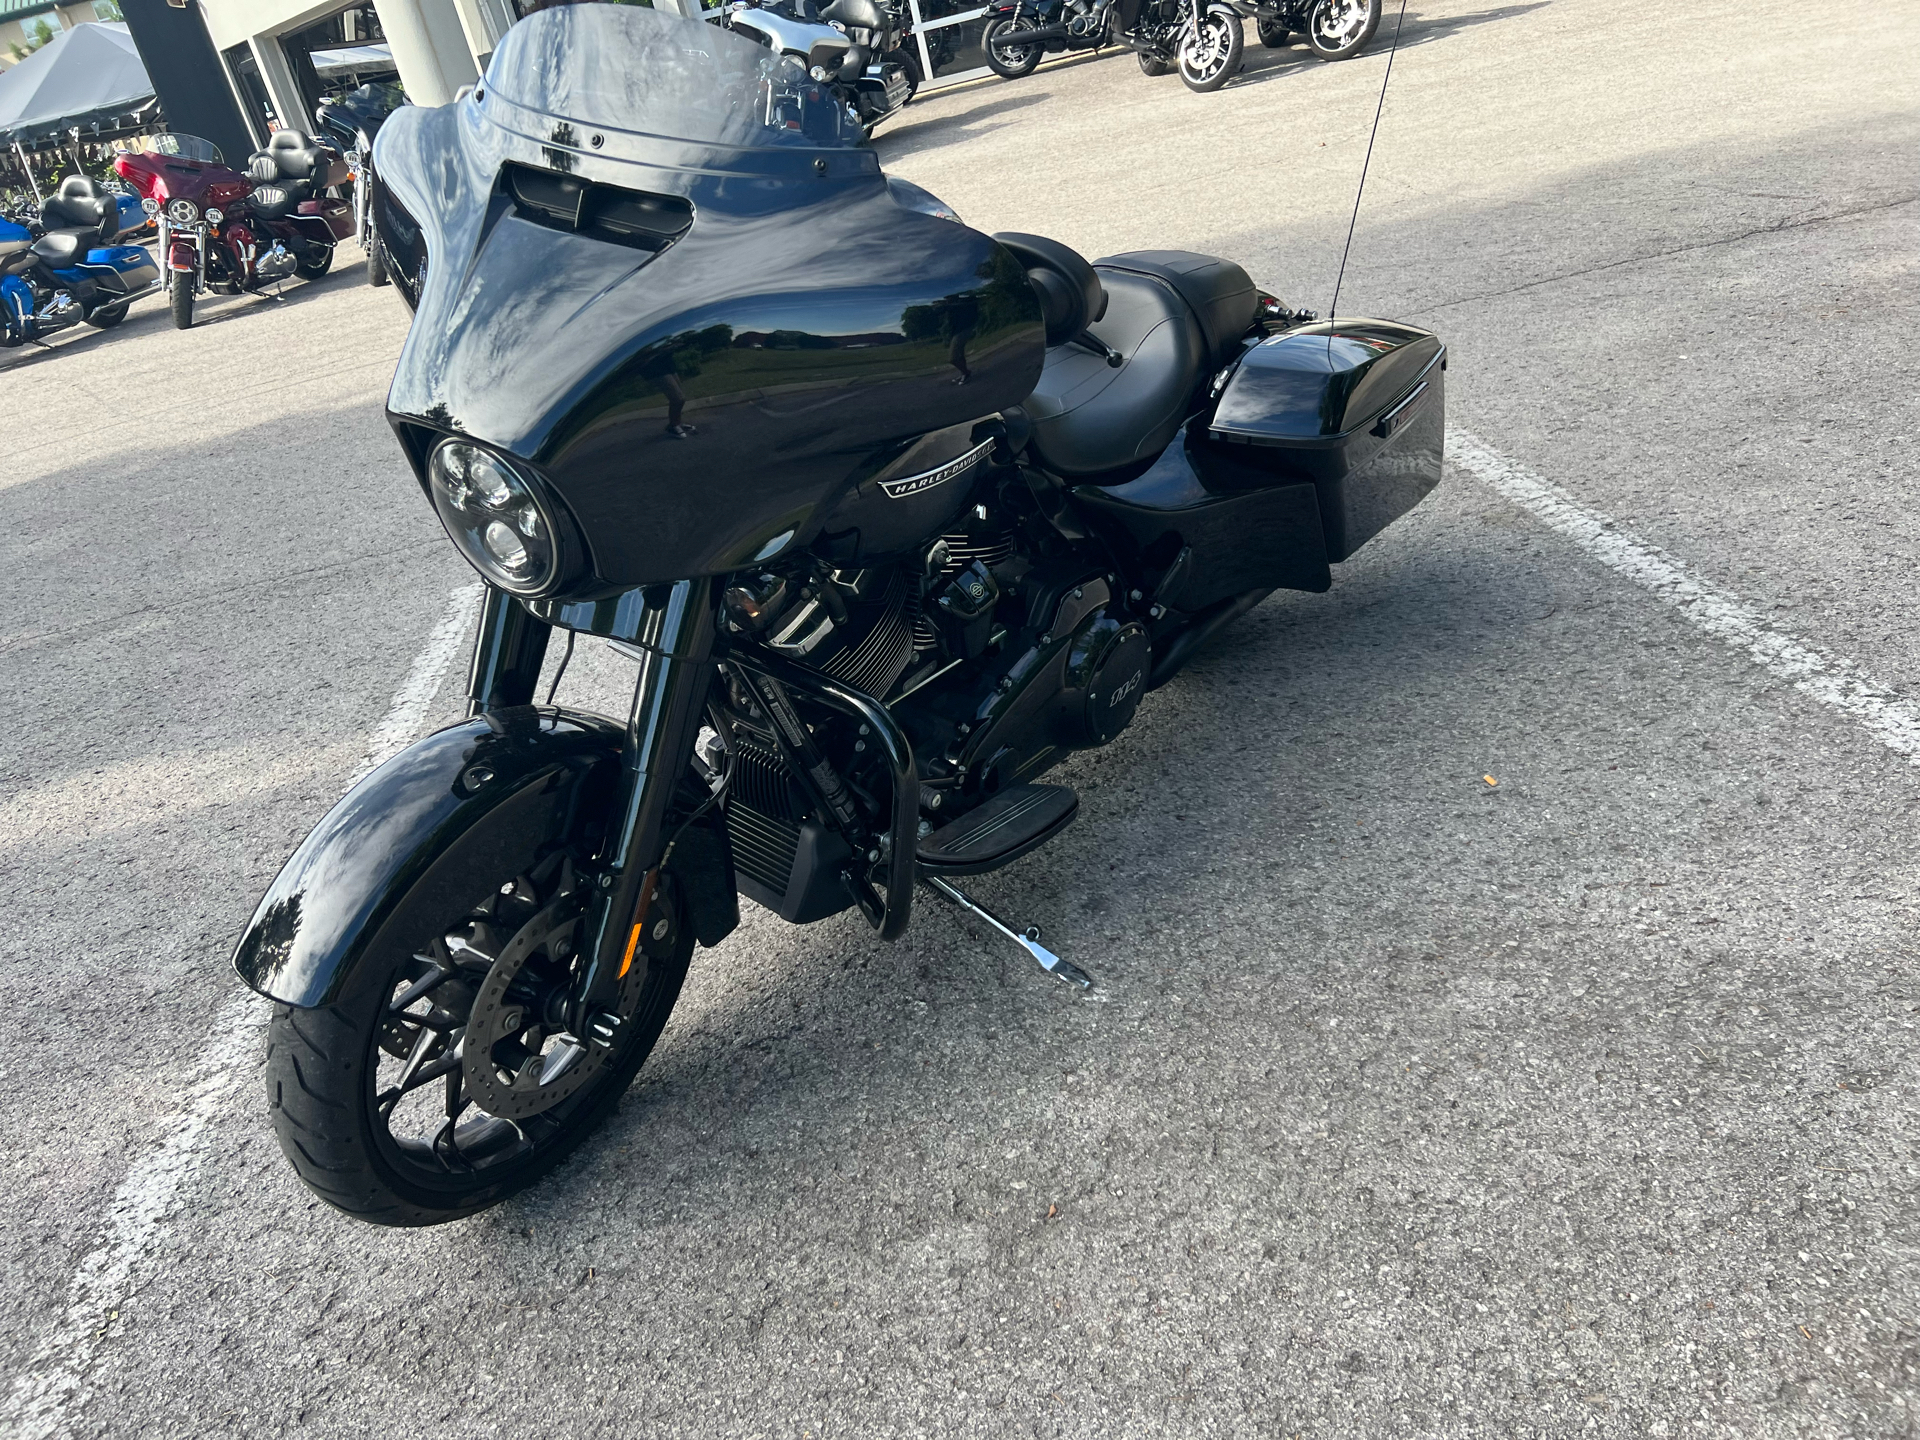 2020 Harley-Davidson Street Glide® Special in Franklin, Tennessee - Photo 25